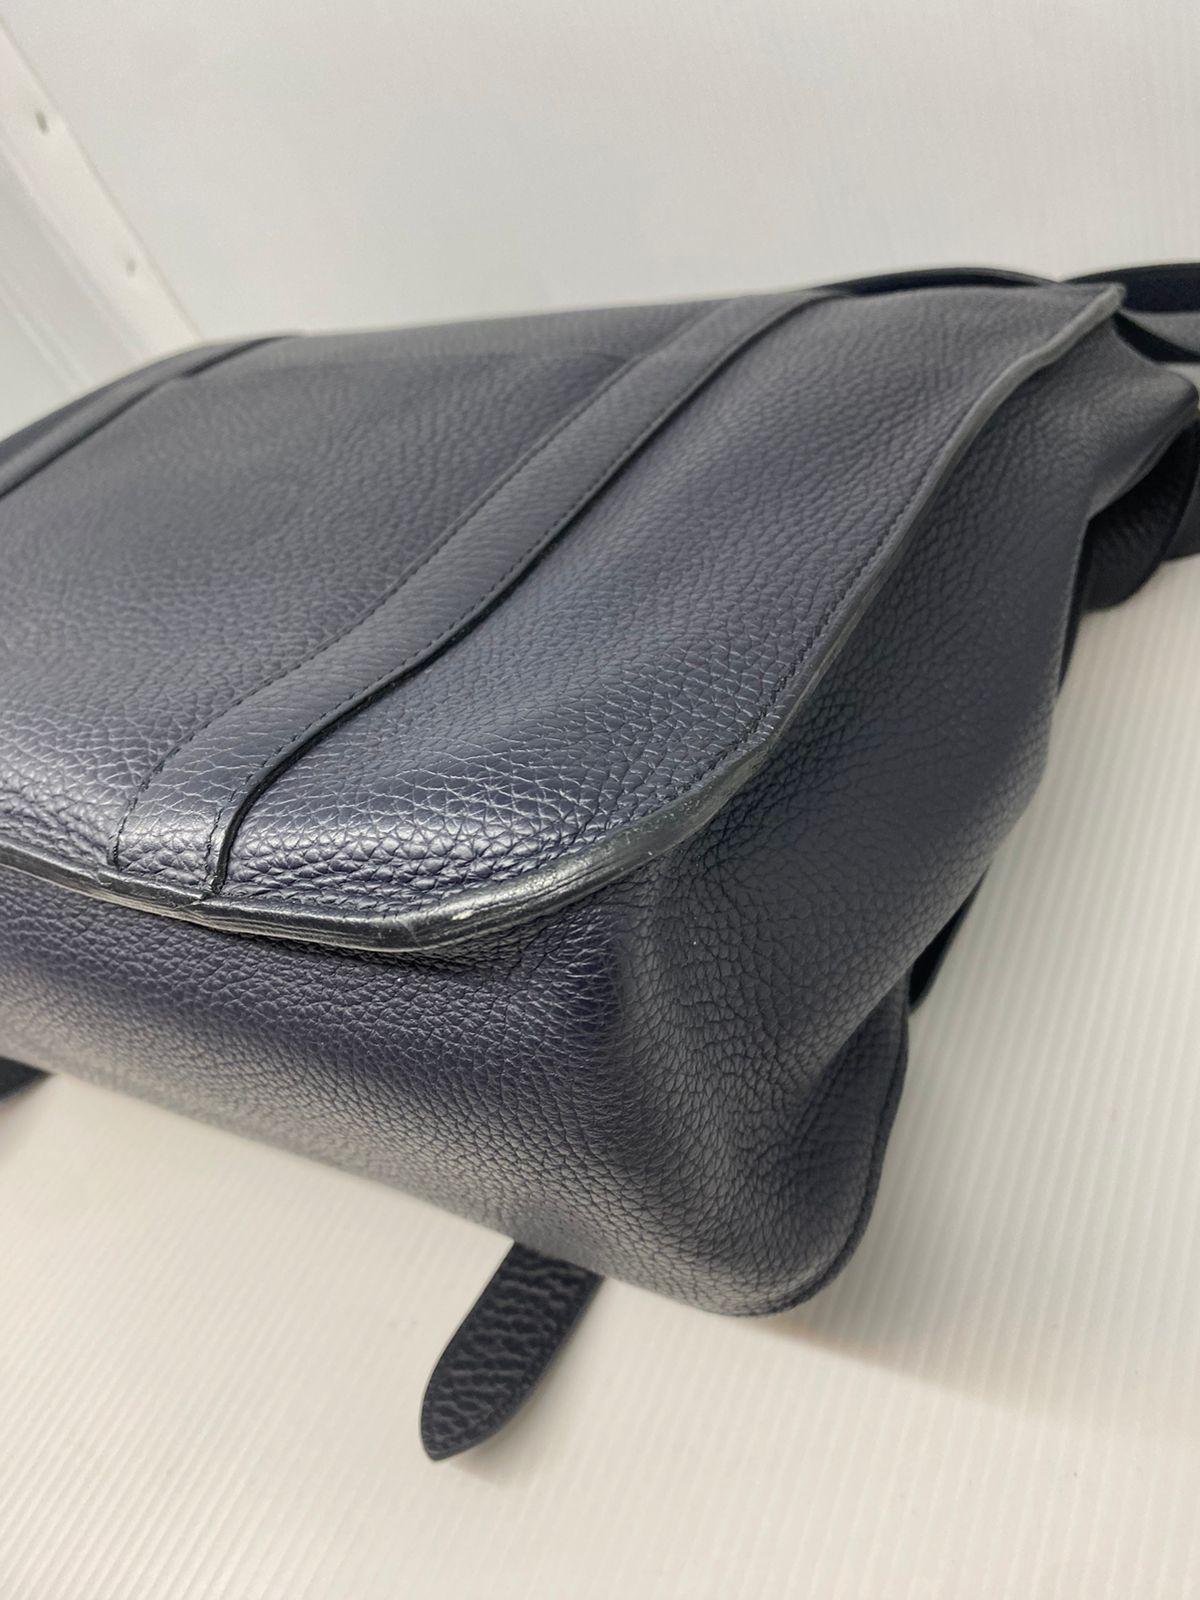 Beautiful steve caporal messenger bag in size 35. Black with palladium hardware. Beautiful seamless stitching throughout. Item is rarely worn and is in very good condition. Slightly losing its shape in pictures due to the nature of the leather.